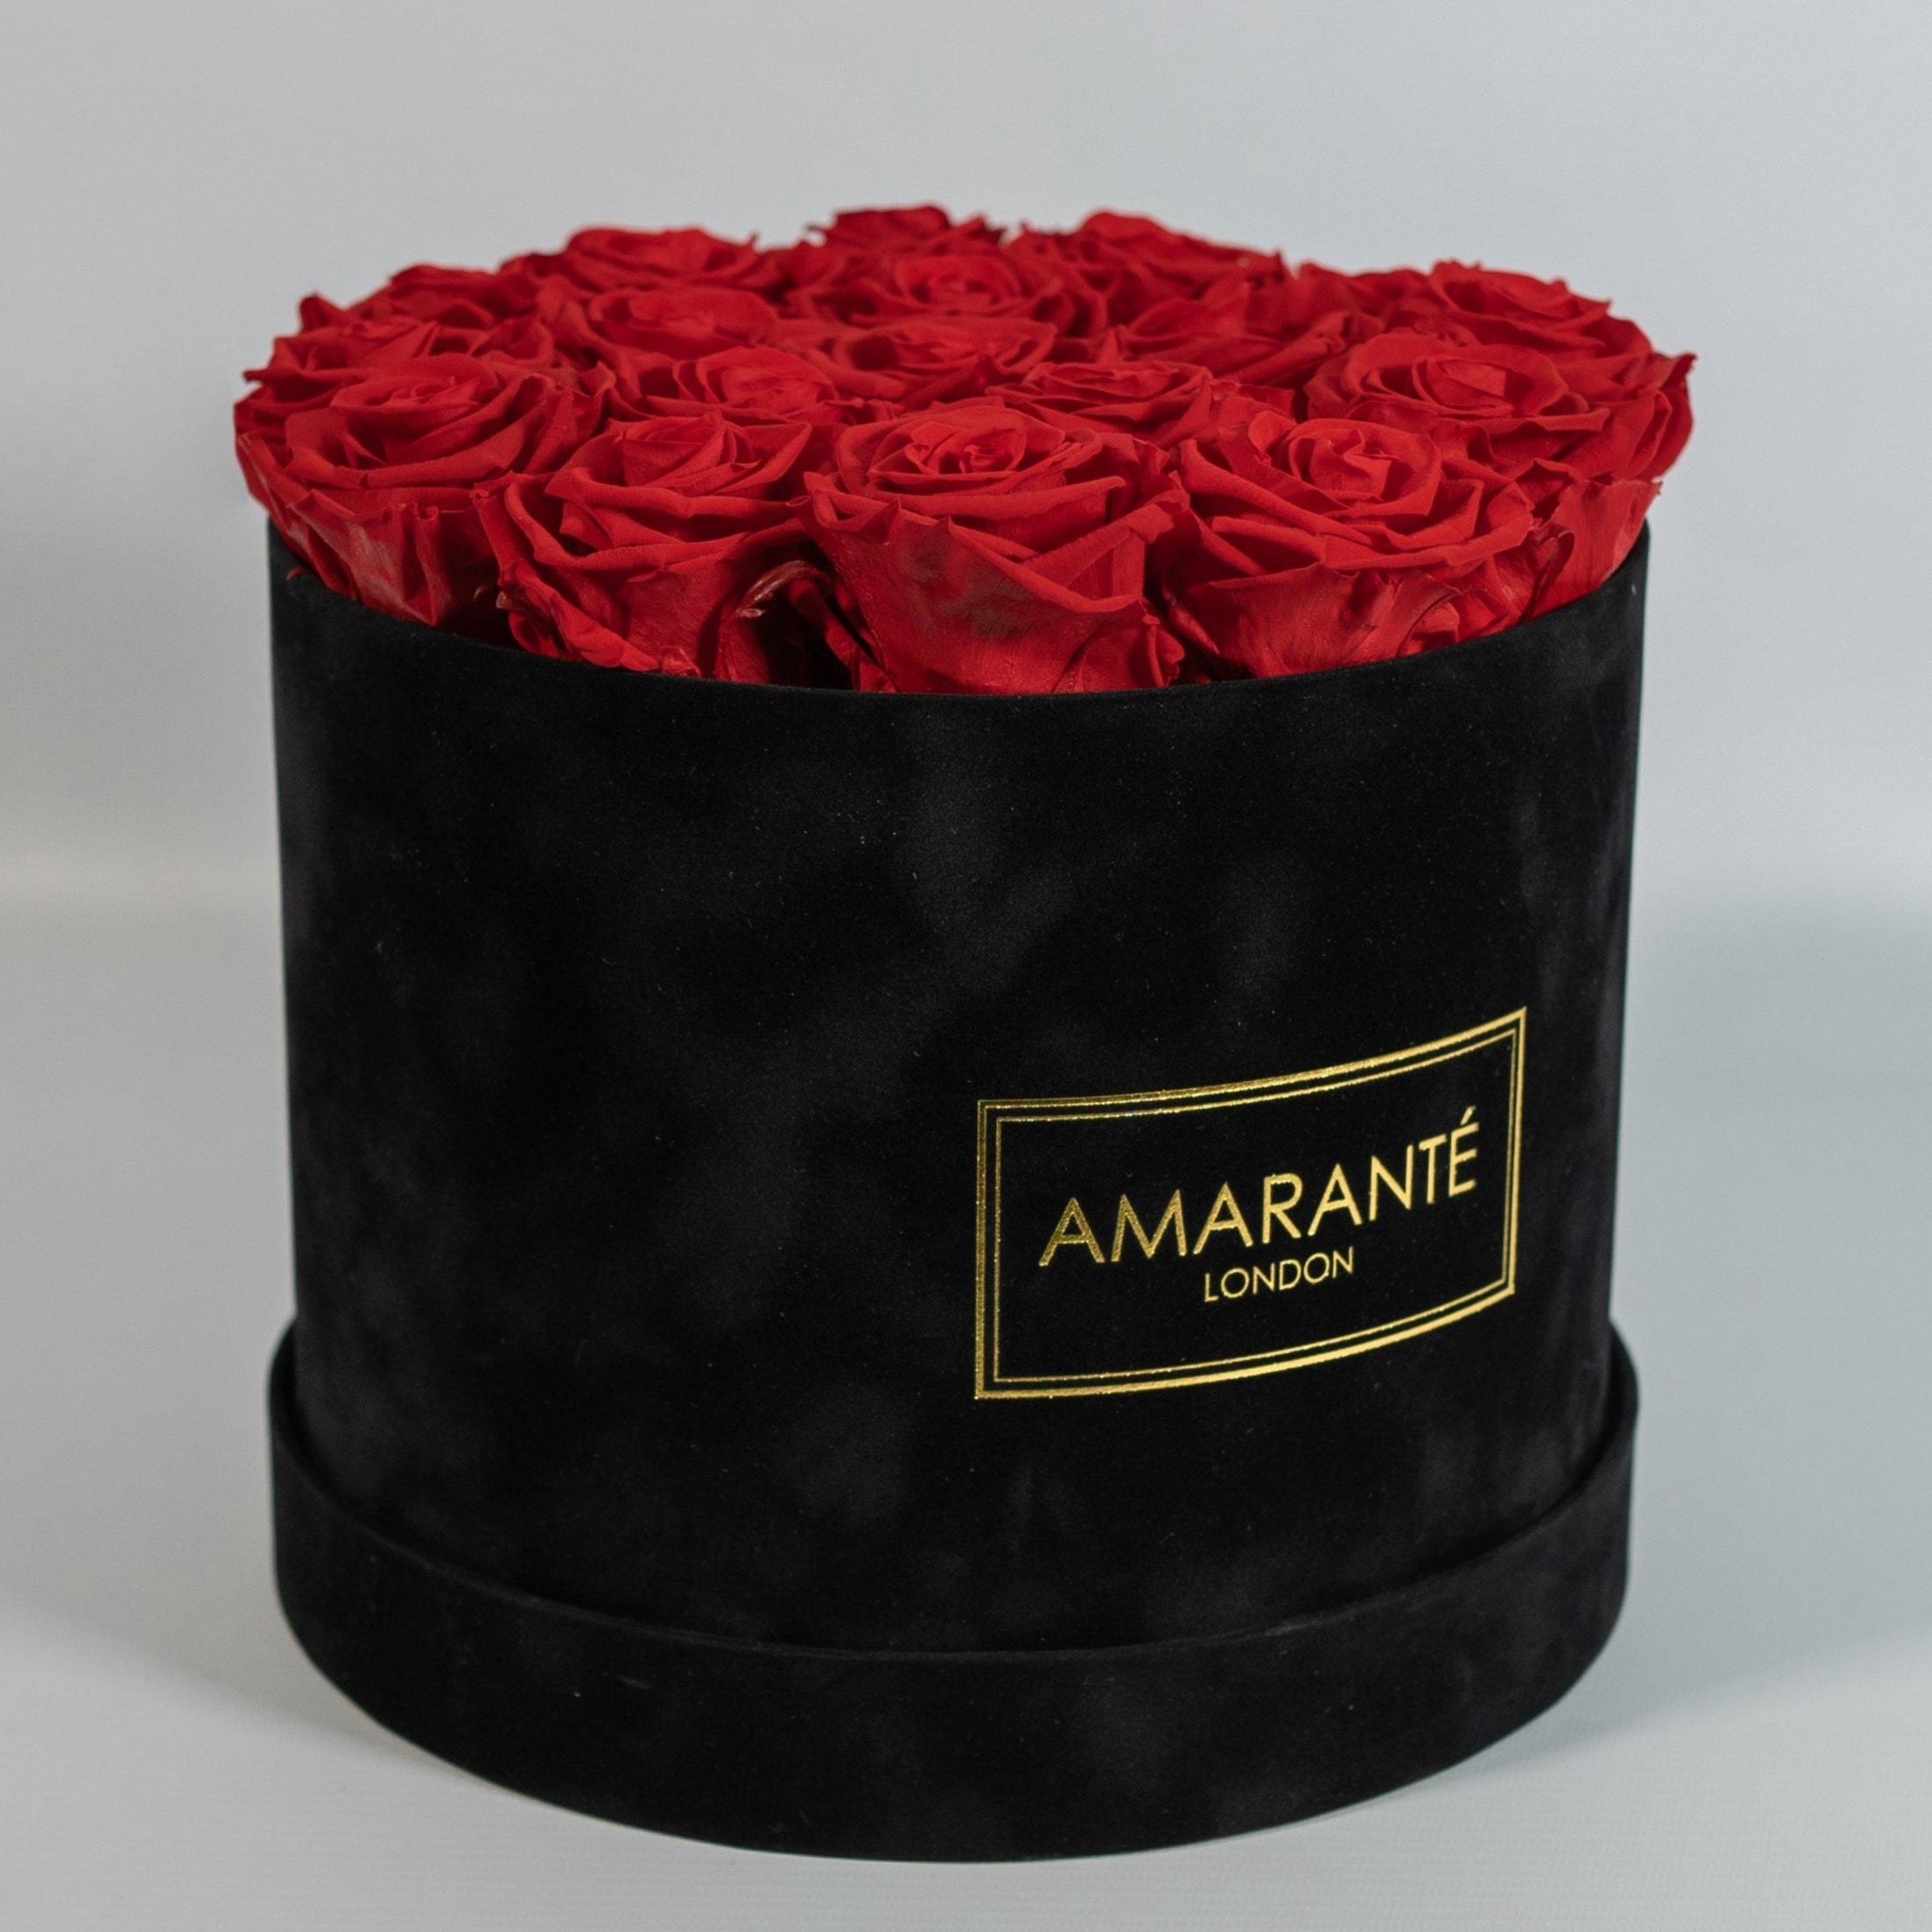 Magical red Roses photographed in a dapper black box 